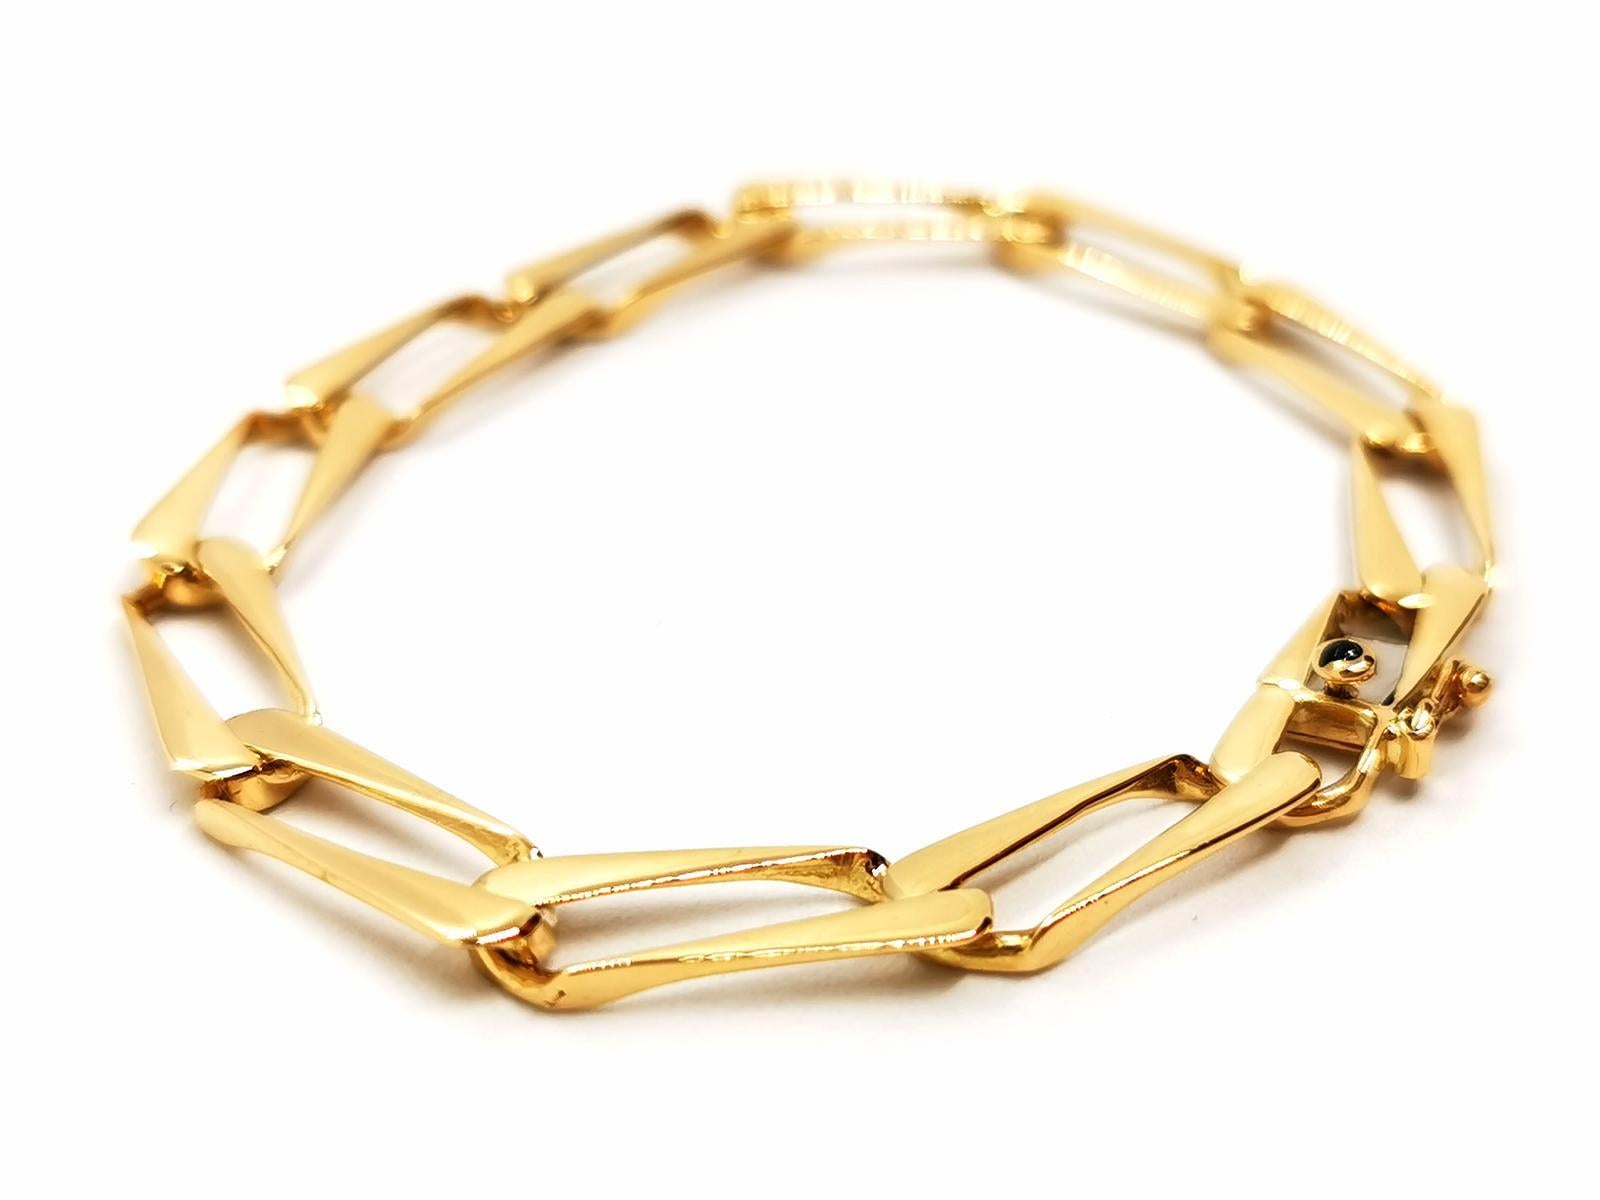 Bracelet signed by caplain Saint André. in yellow gold 750 thousandths (18 carats). large gourmet mesh. length: 19.5 cm. width: 0.68 cm. dimension of a link: 1.96 cm x 0.68 cm. set on the fermoi. of a blue sapphire. cut in cabochon of about 0.01 ct.